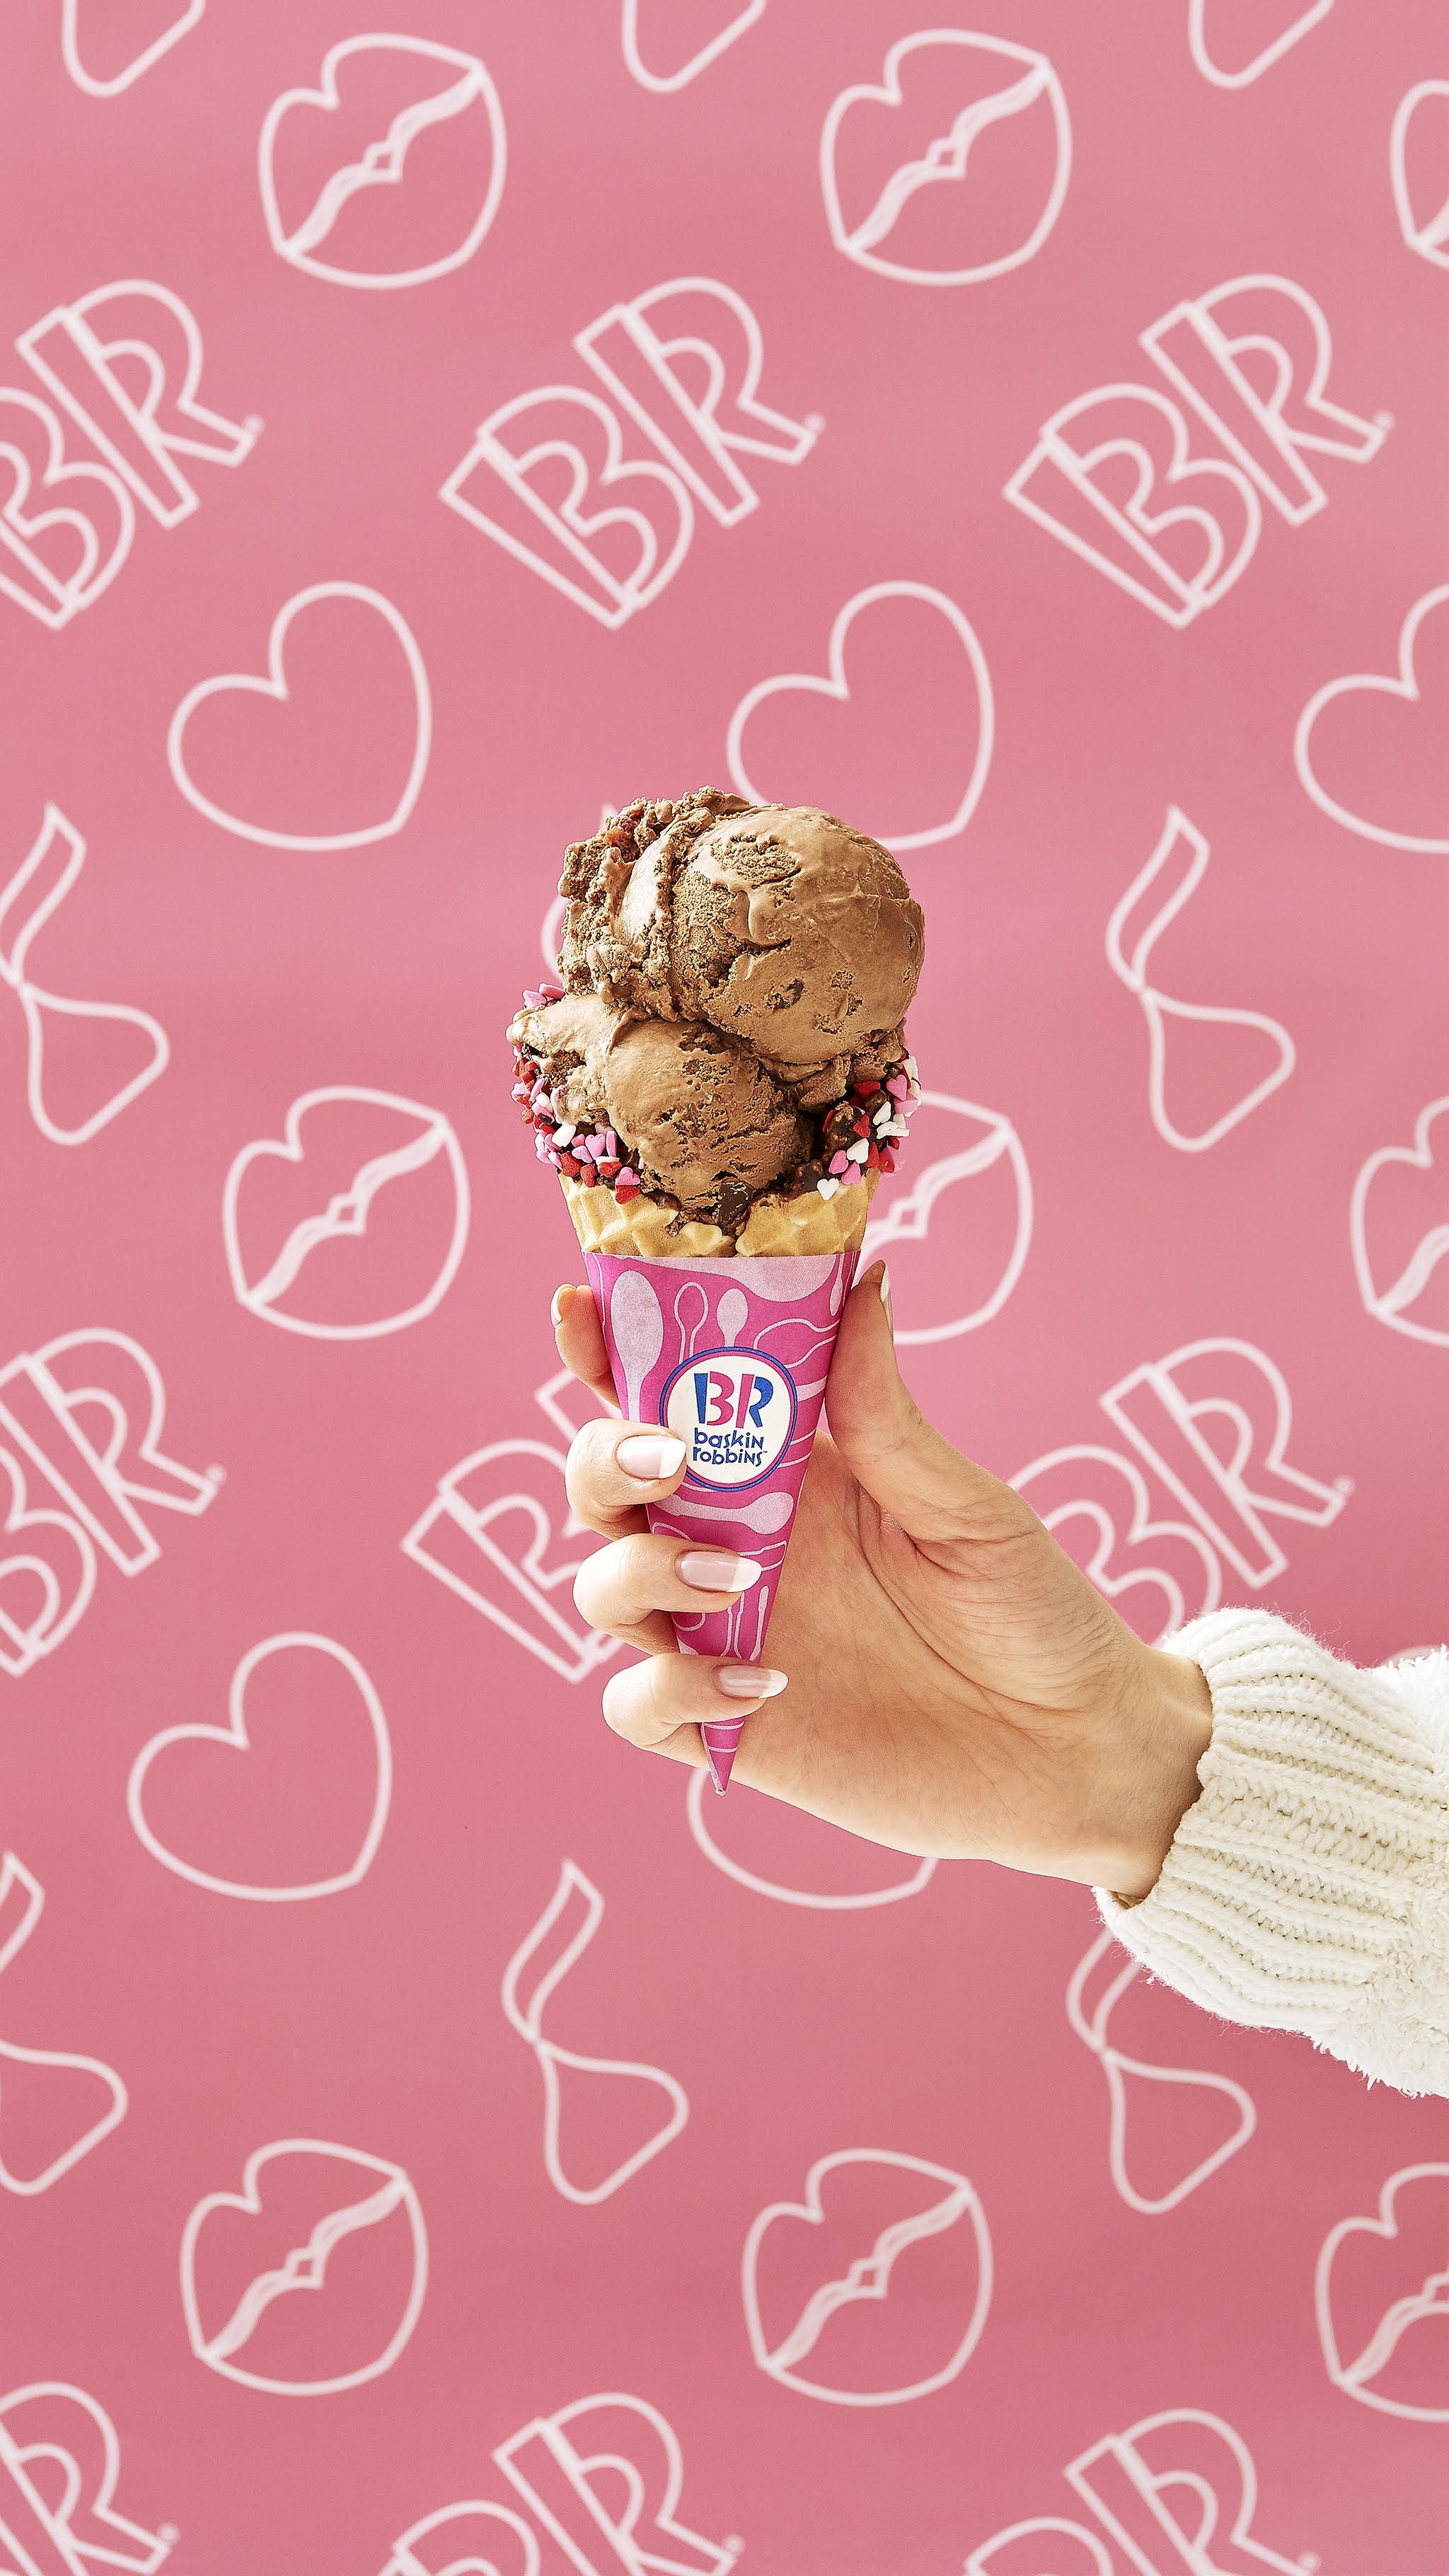 Baskin Robbins: The company selling ice cream in nearly 50 countries, Founded in Glendale, California. 2050x3650 HD Wallpaper.